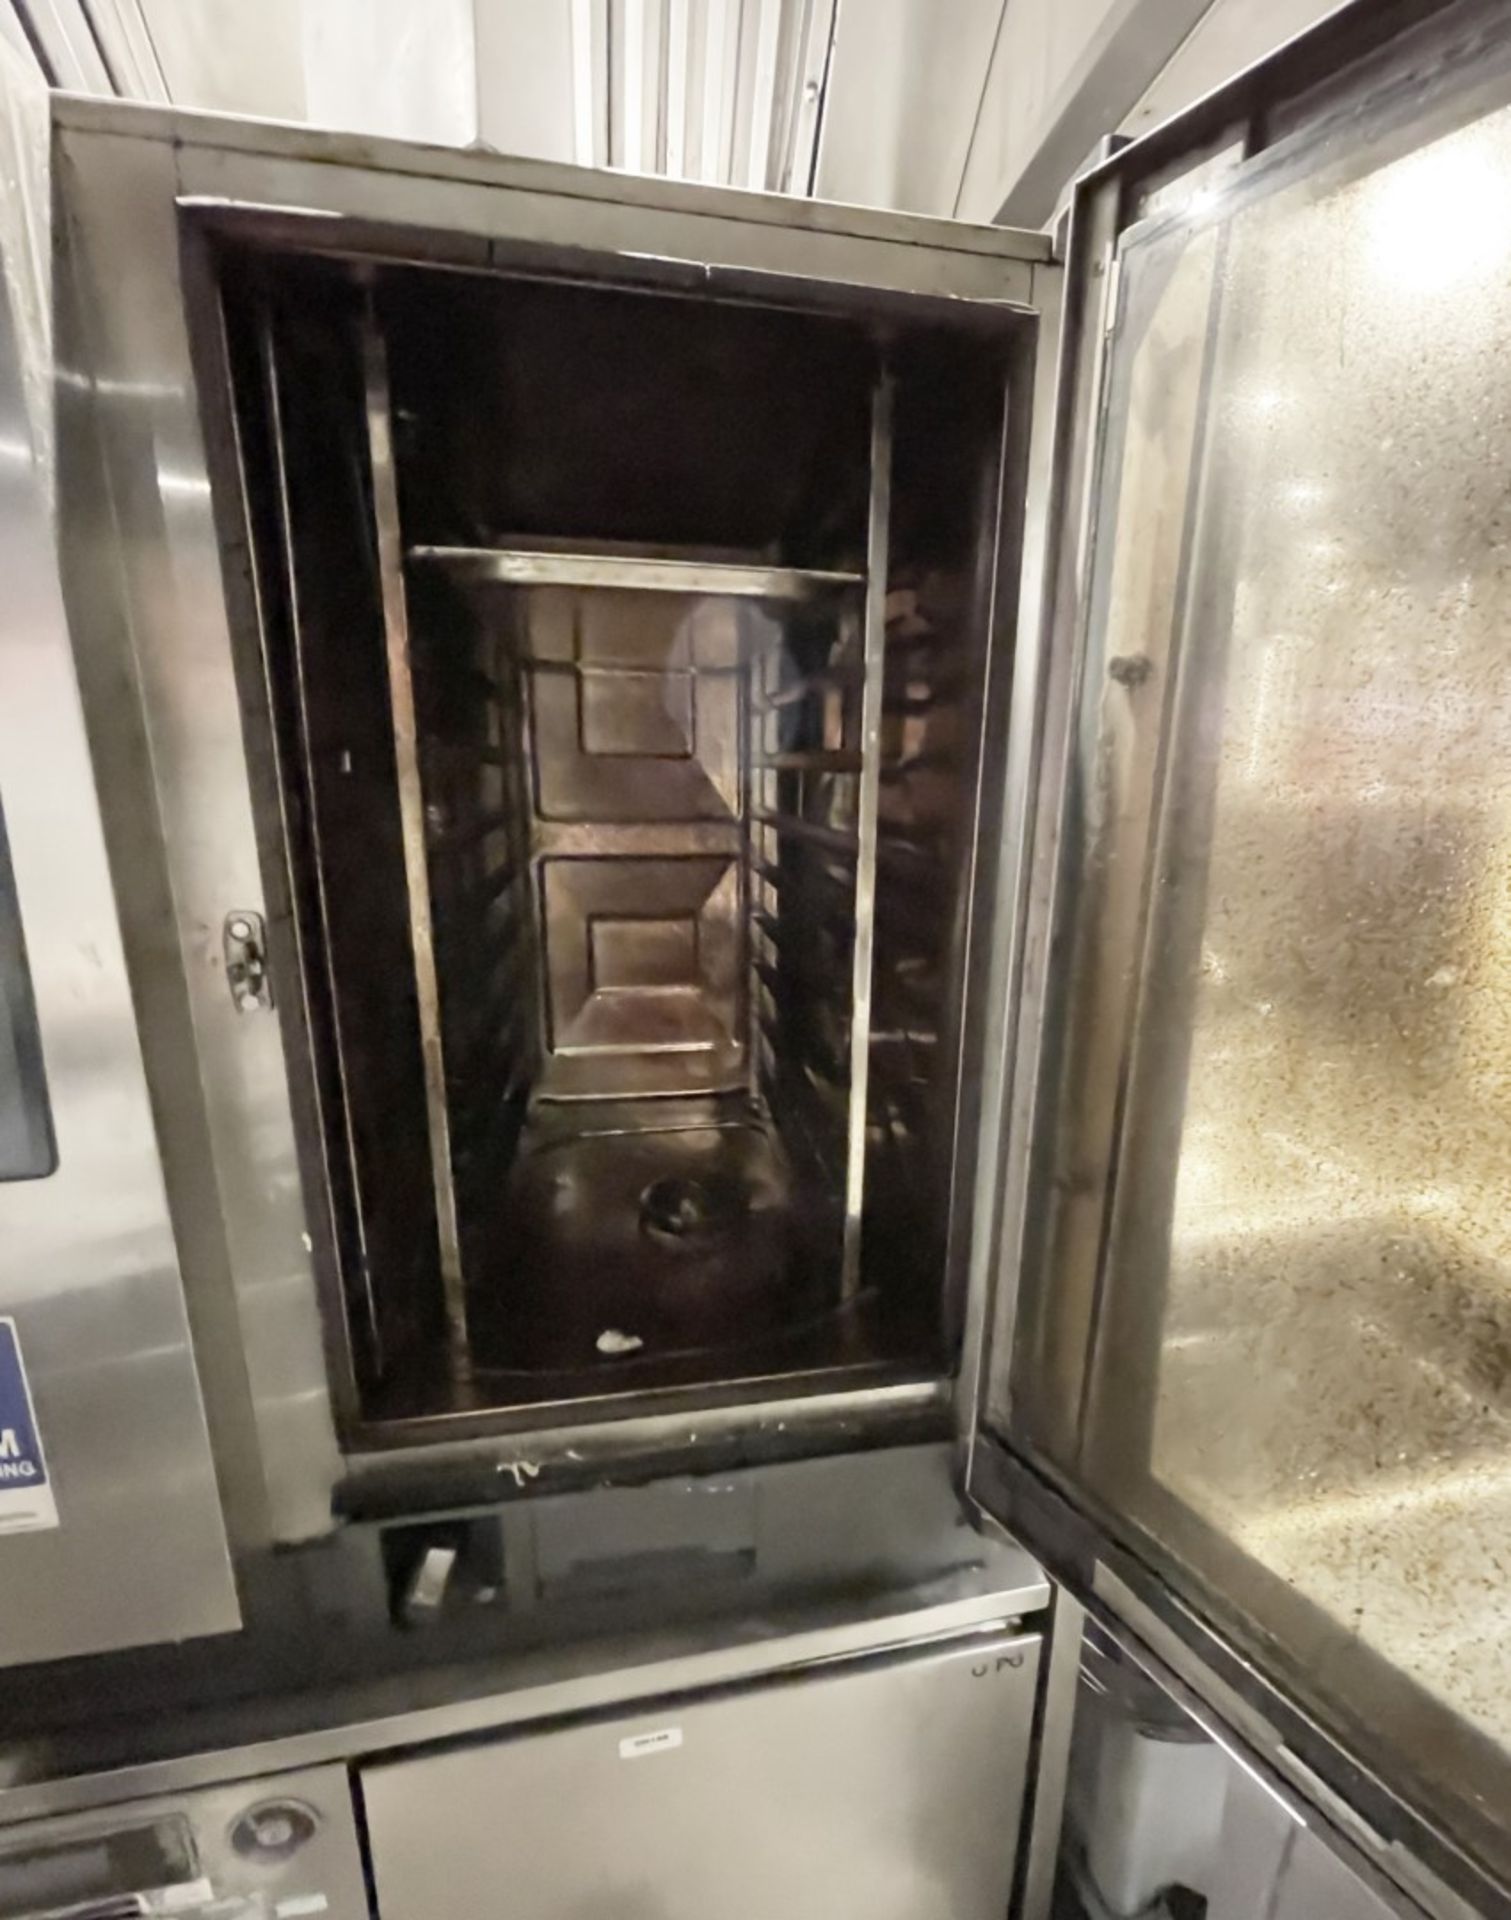 1 x Rational iCombi Classic Electric 3 Phase 10 Grid Combi Oven - Year: 2021 - Model: LM200DE - Image 10 of 18